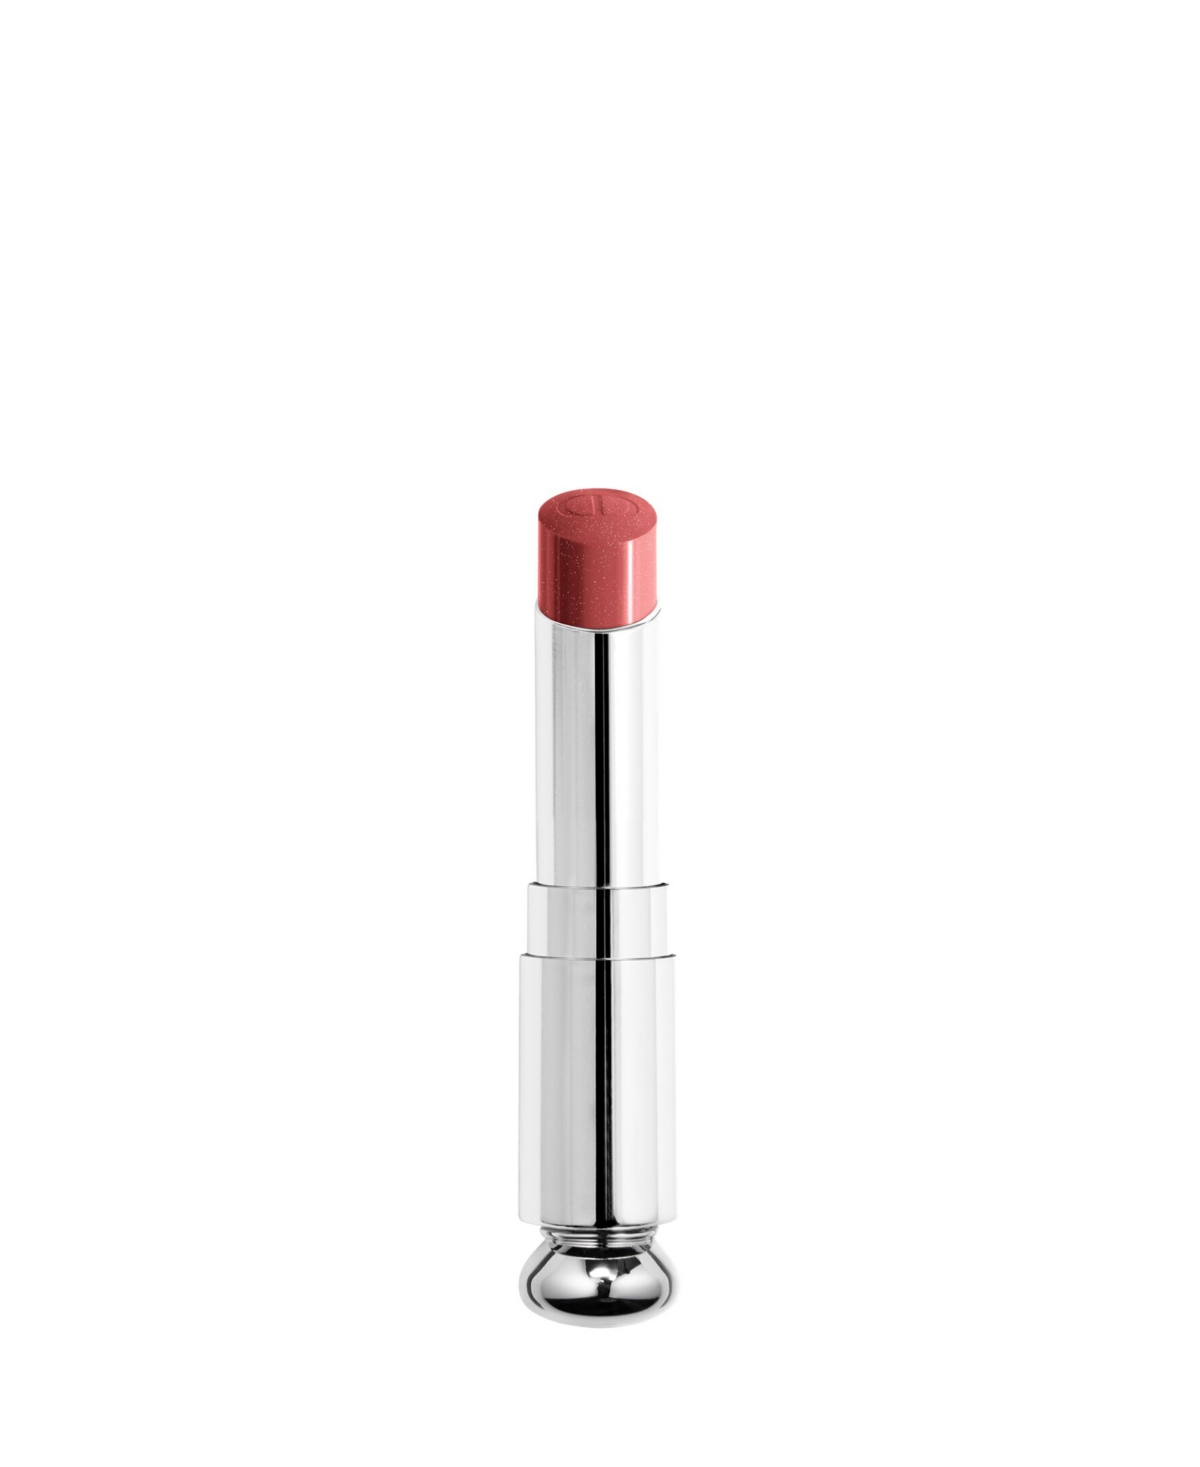 Dior Addict Shine Lipstick Refill In Cherie (pink Rosewood)